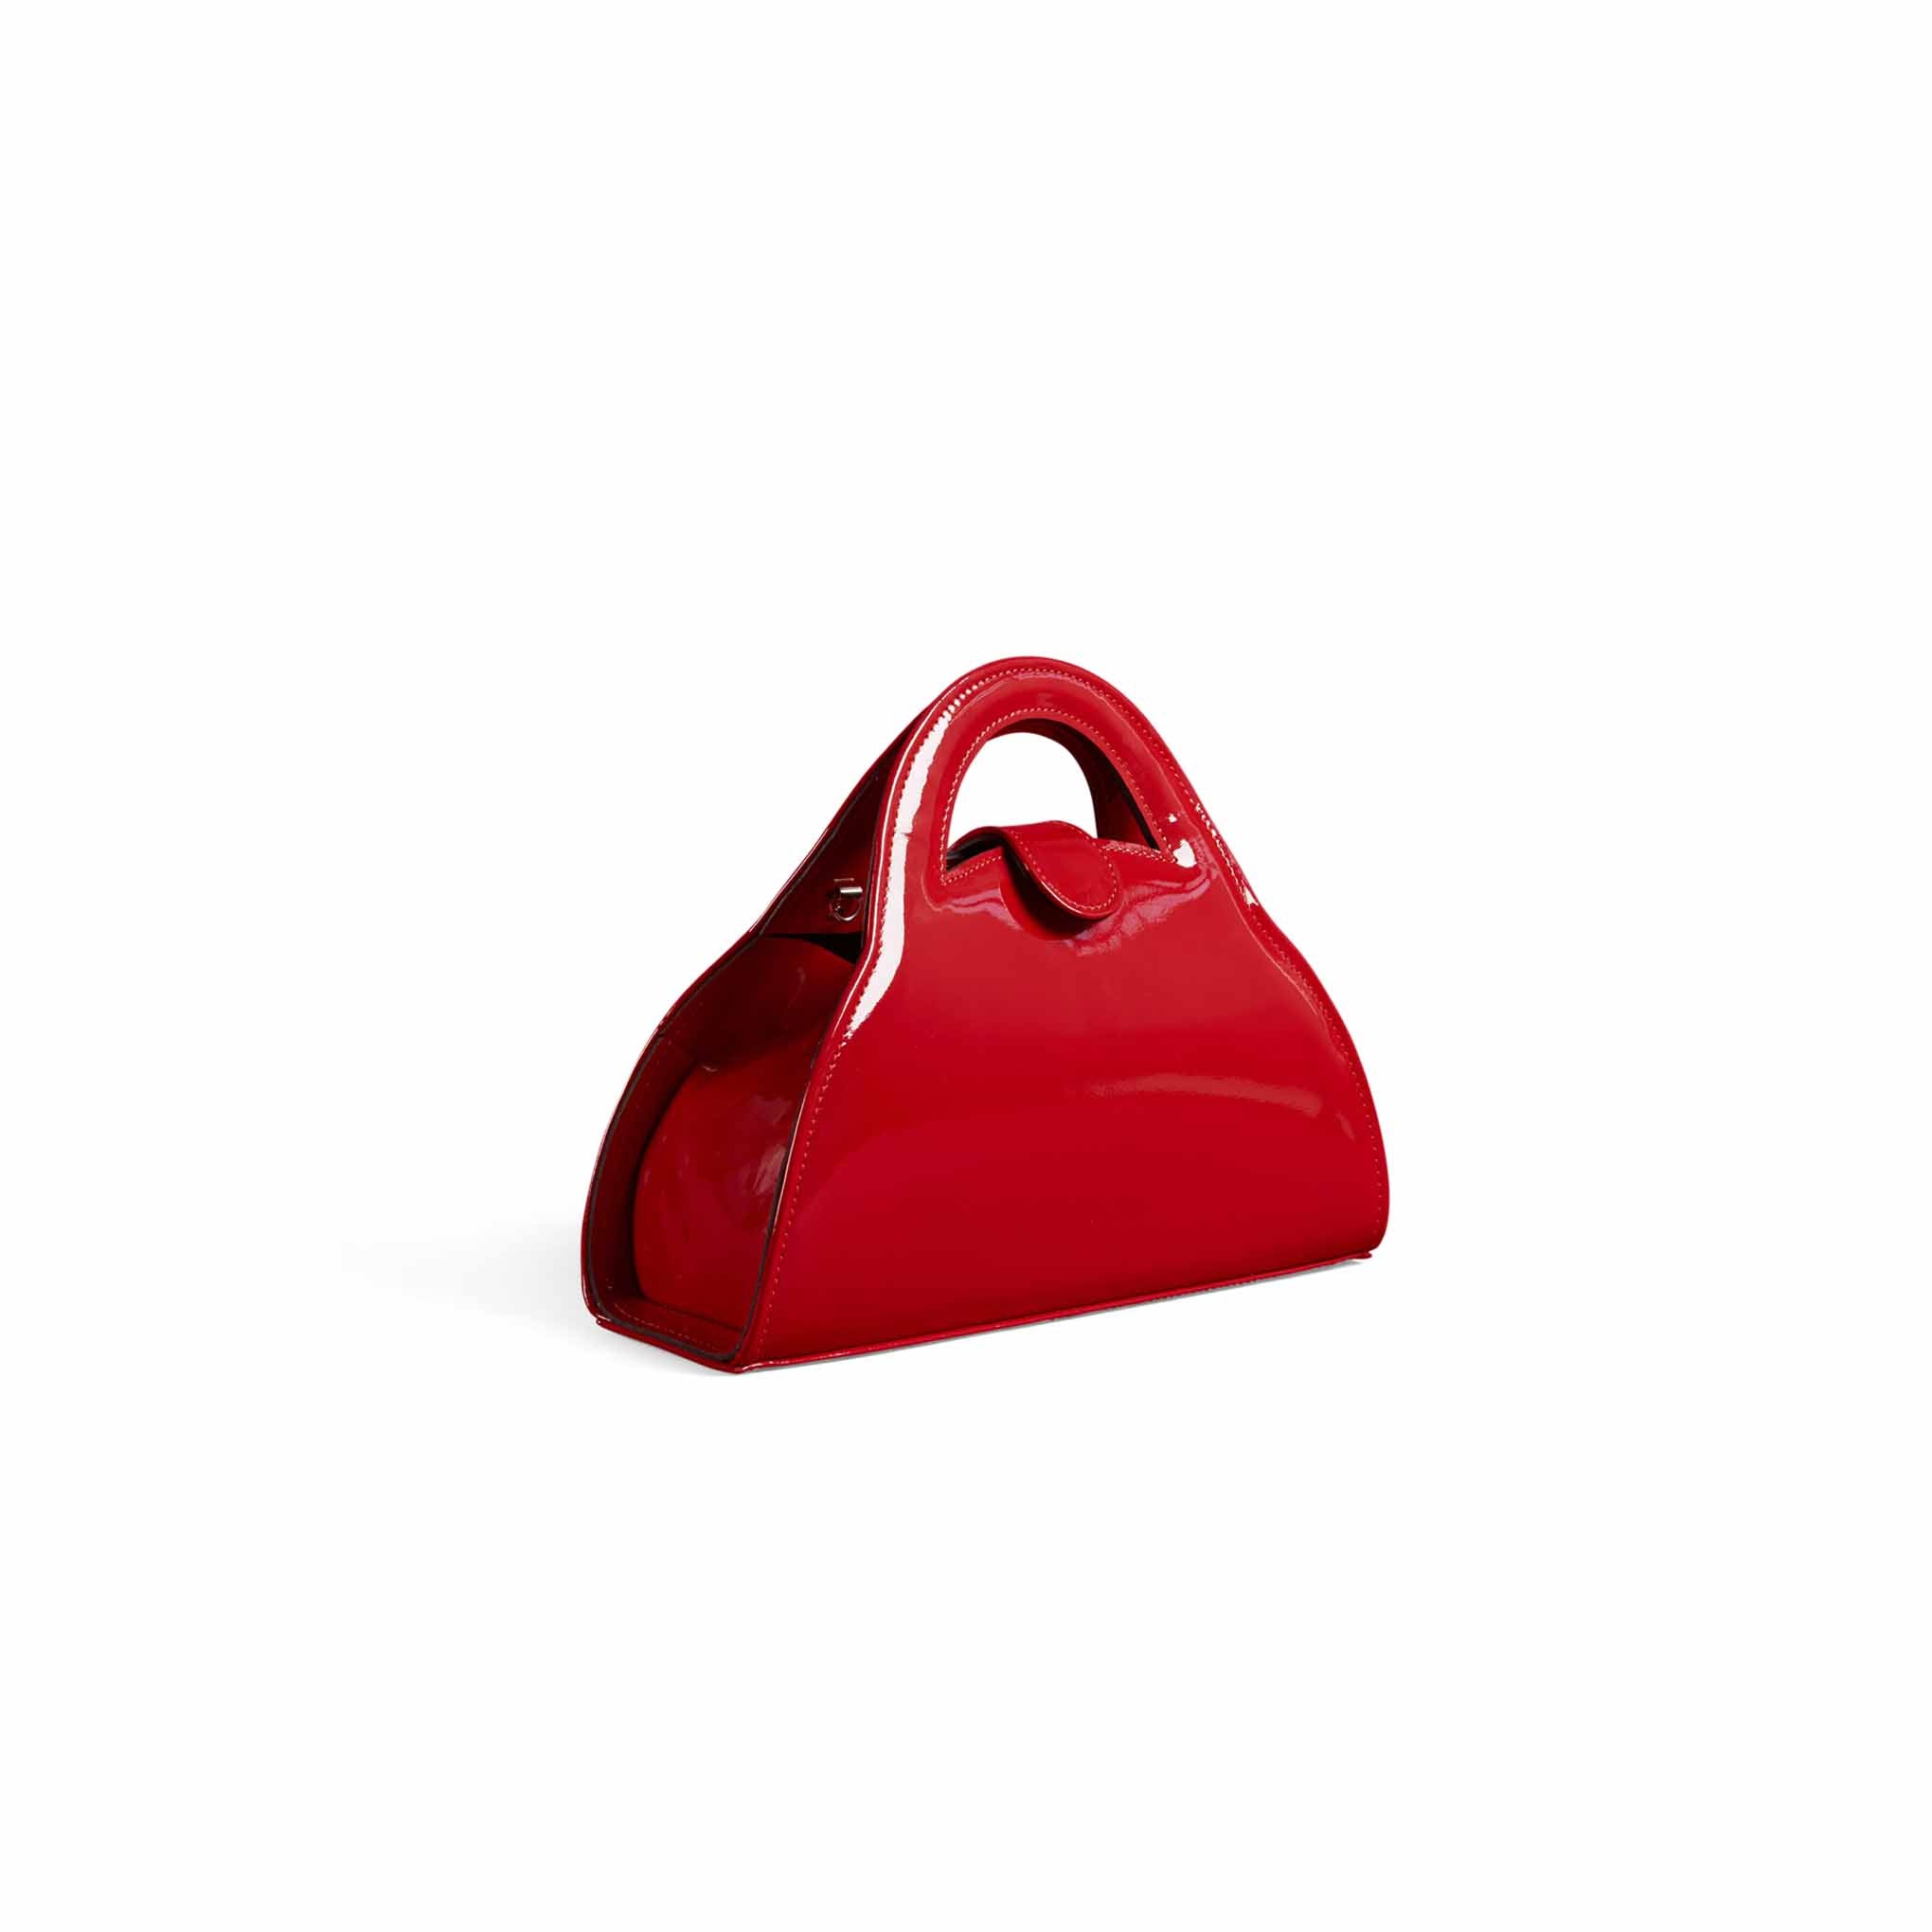 Small Red Patent Leather Bag - Schandra